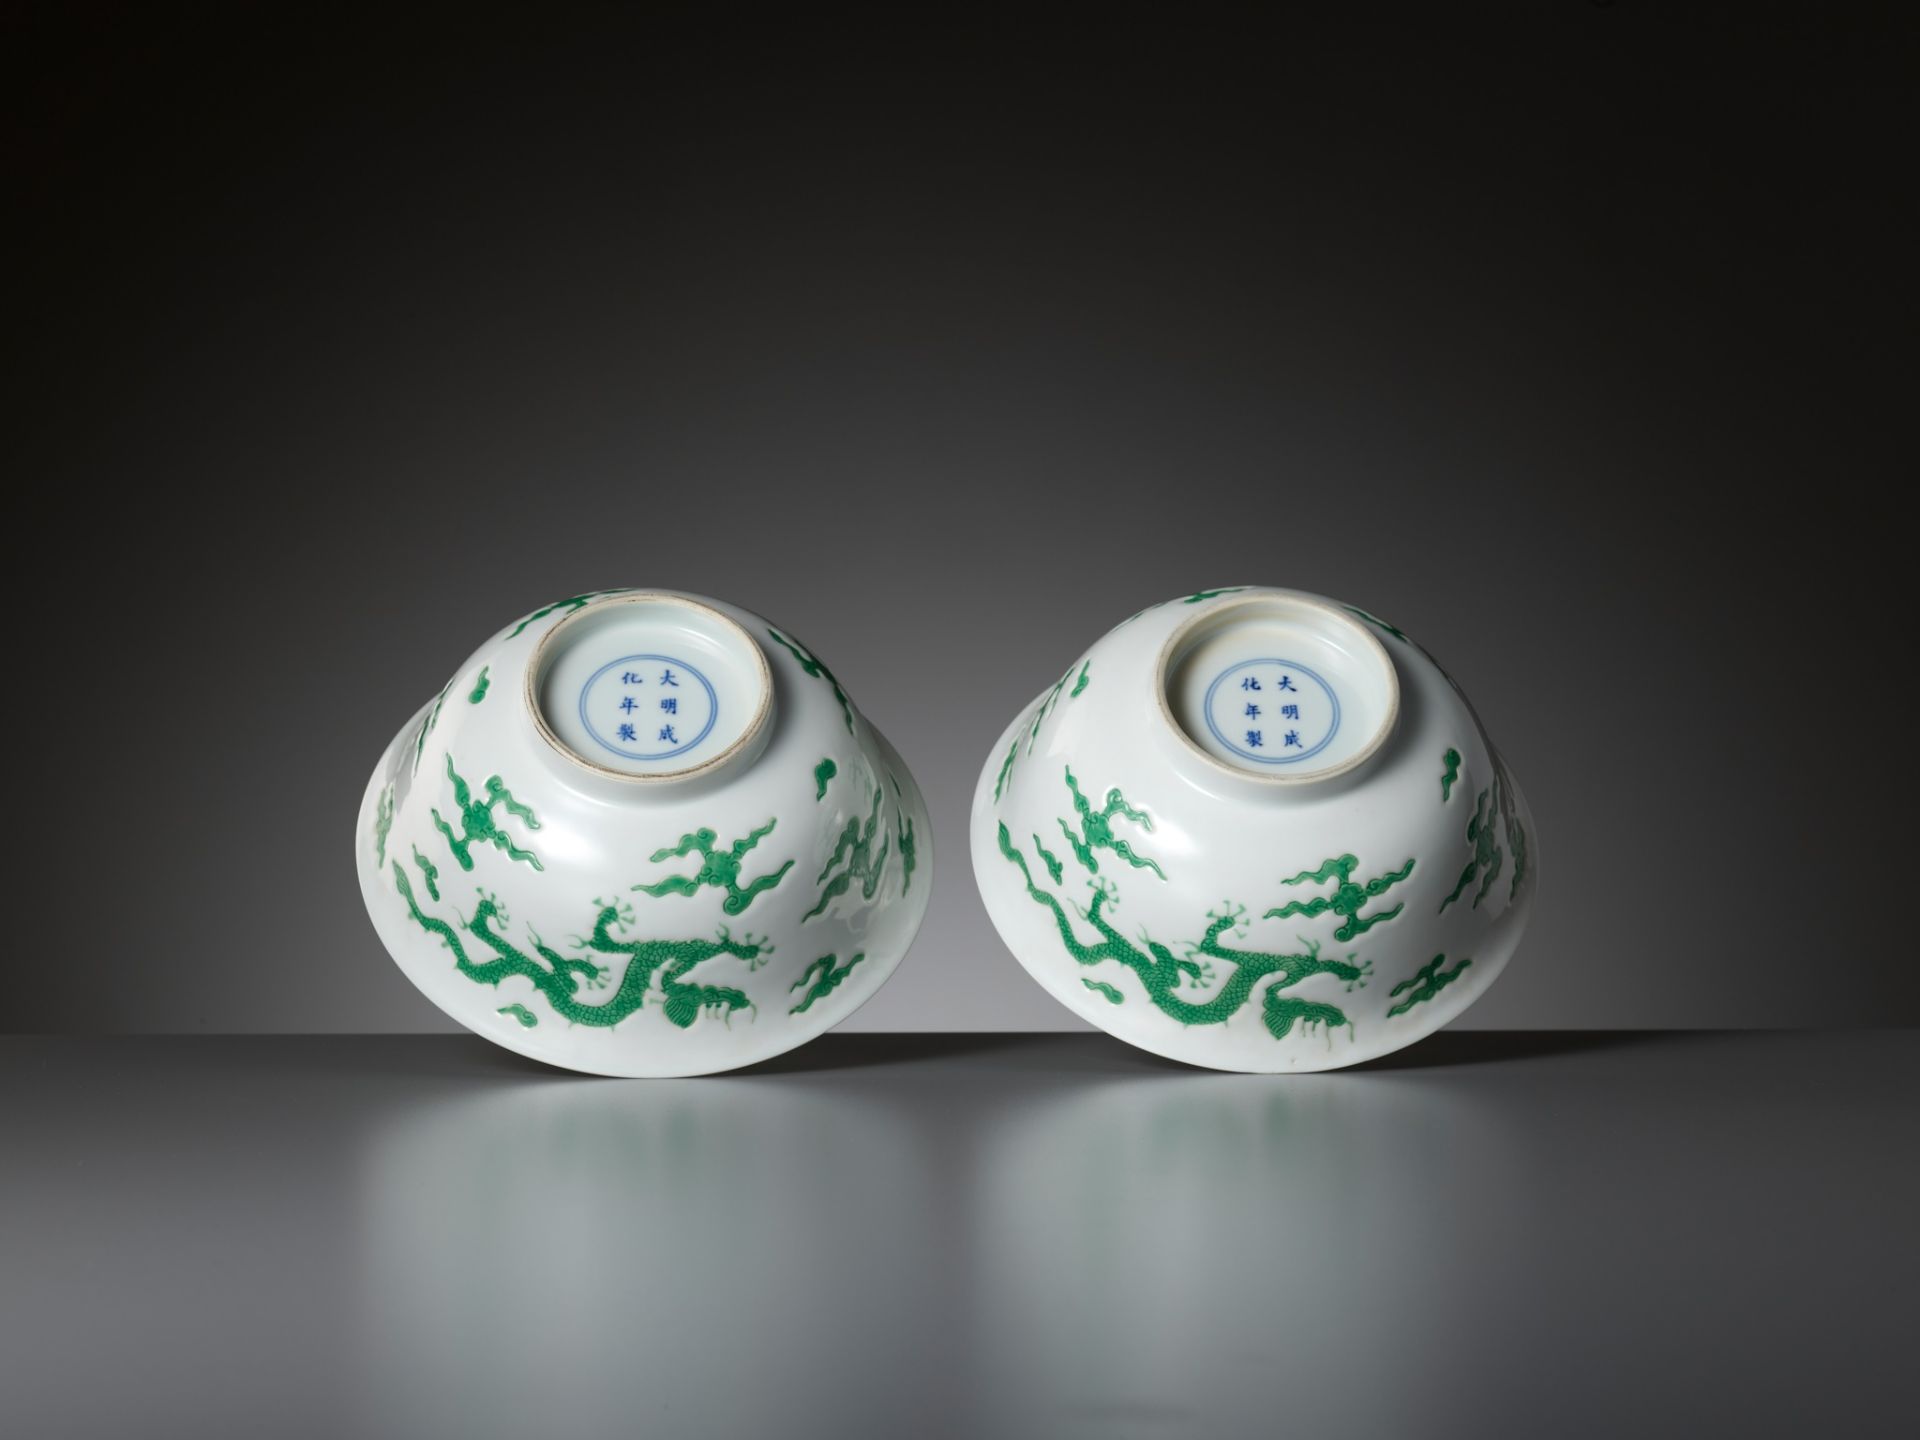 A RARE PAIR OF MING-STYLE GREEN-ENAMELED 'DRAGON' BOWLS, KANGXI PERIOD - Image 10 of 18